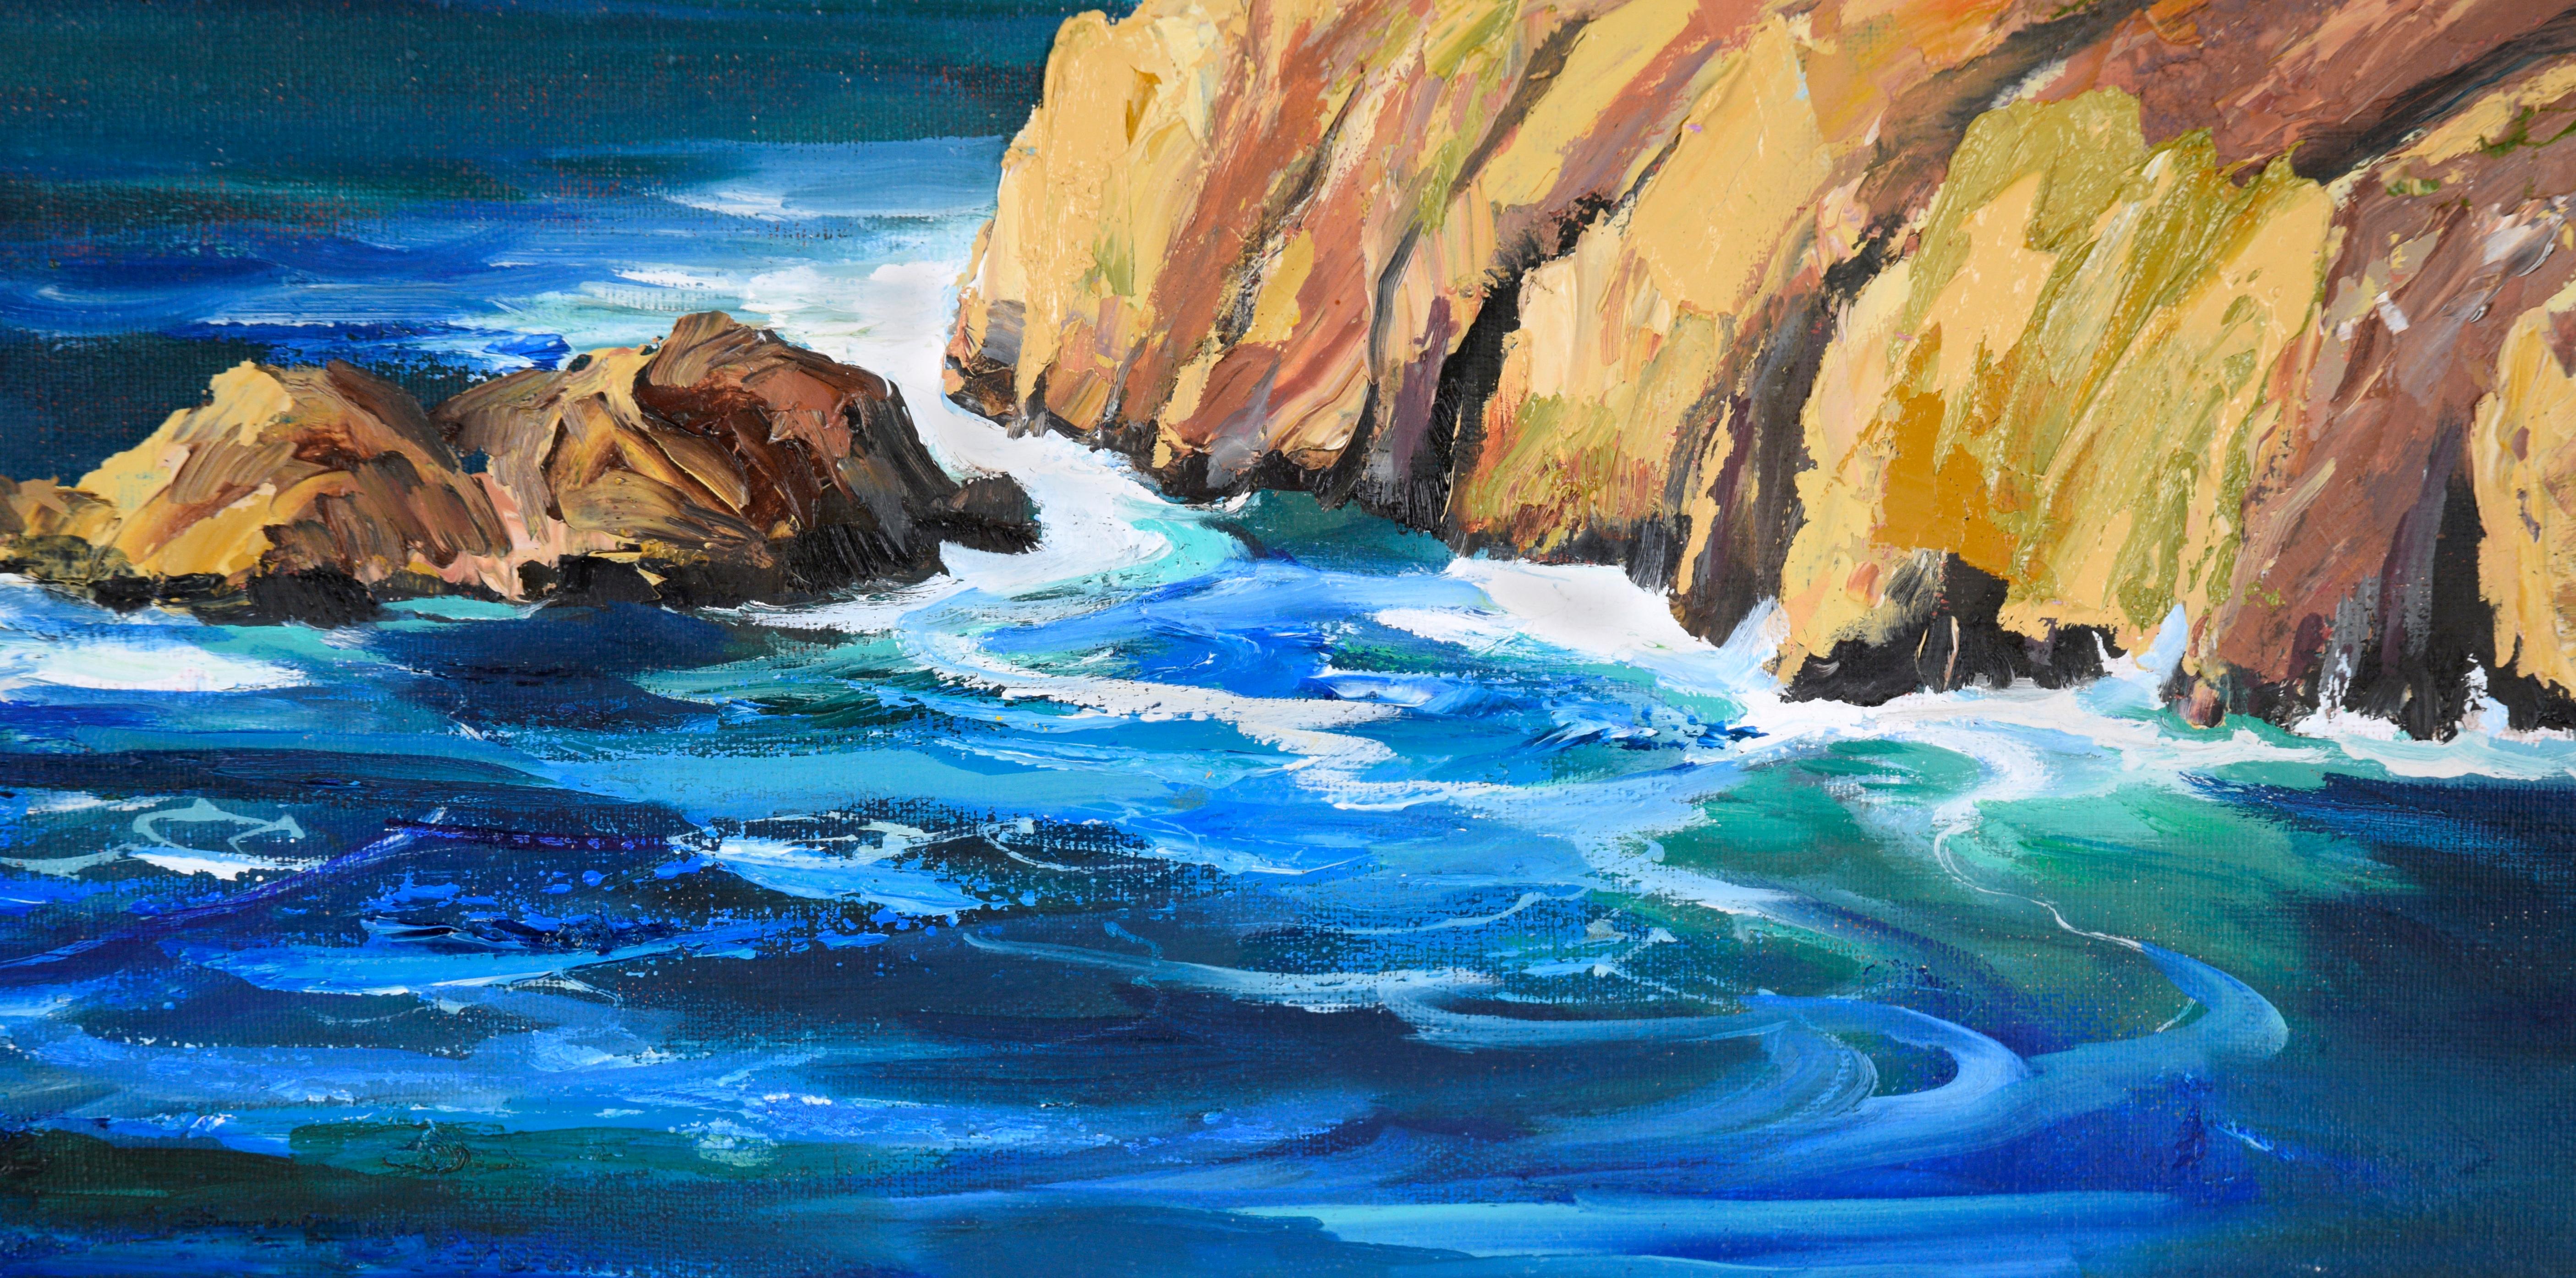 Coastal Cliffs and Rocks - Hurricane Point - Big Sur Seascape in Oil on Canvas For Sale 2